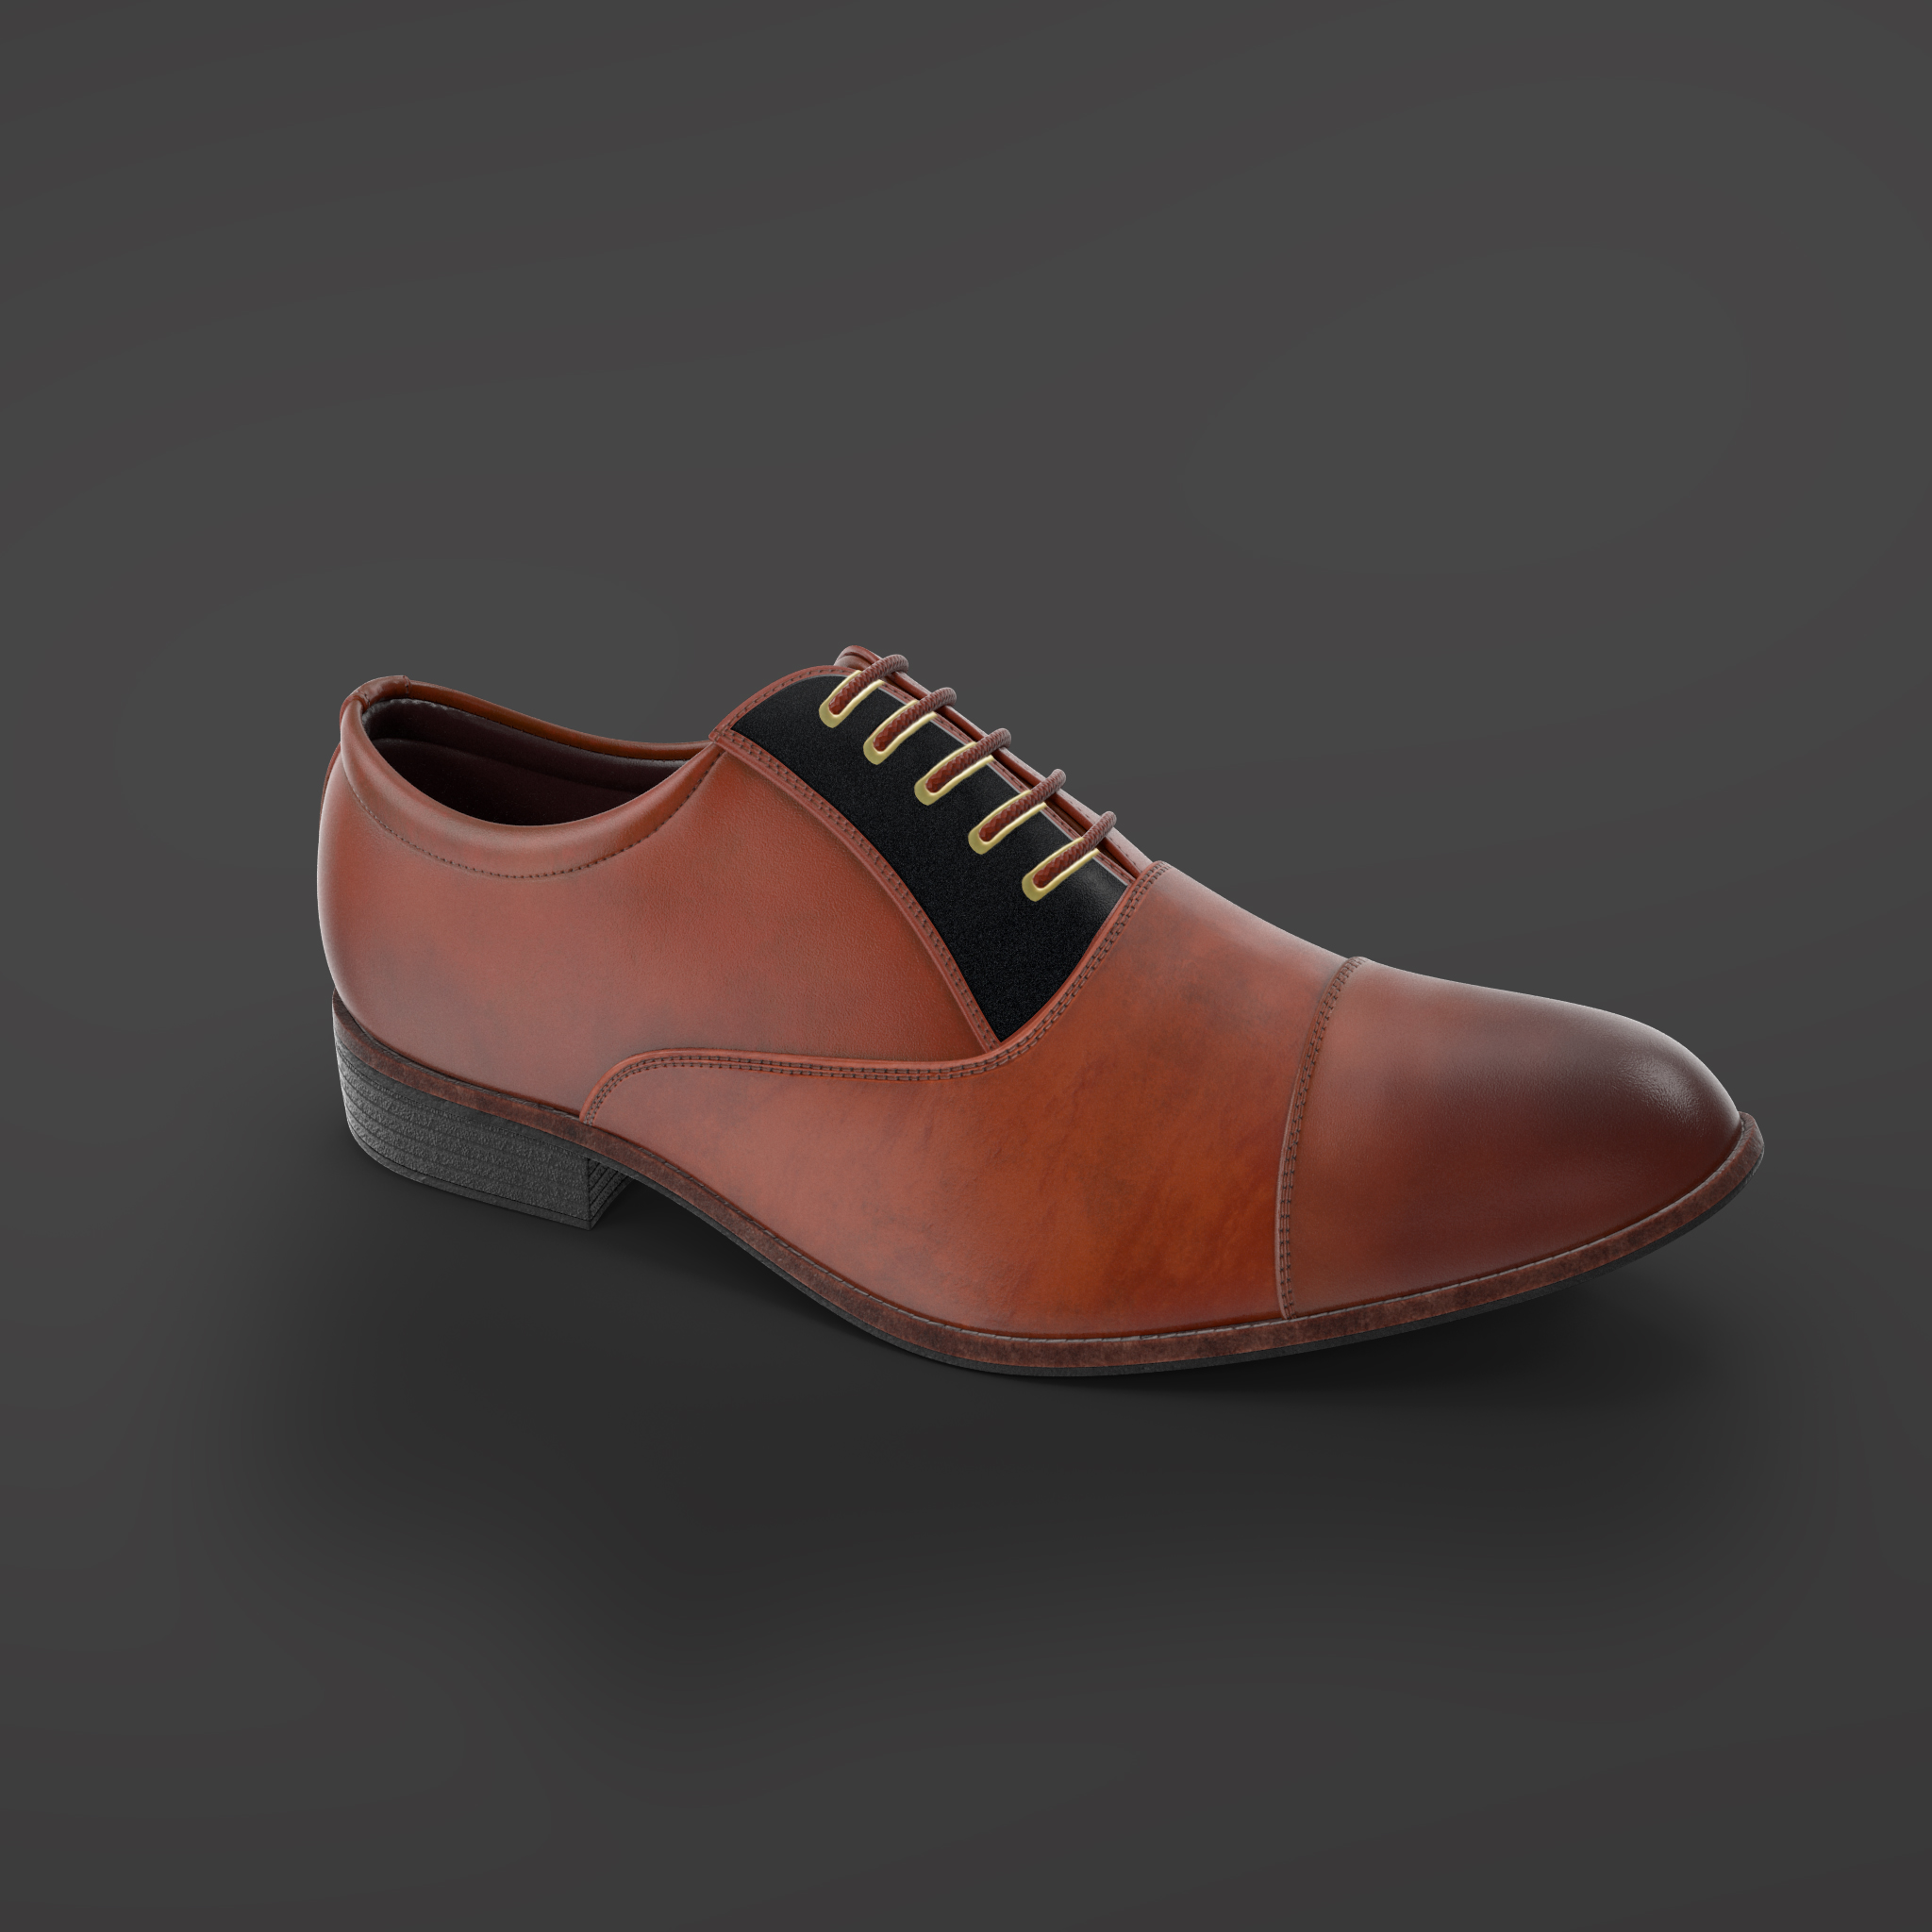 Ventura luxurious lace up leather shoe